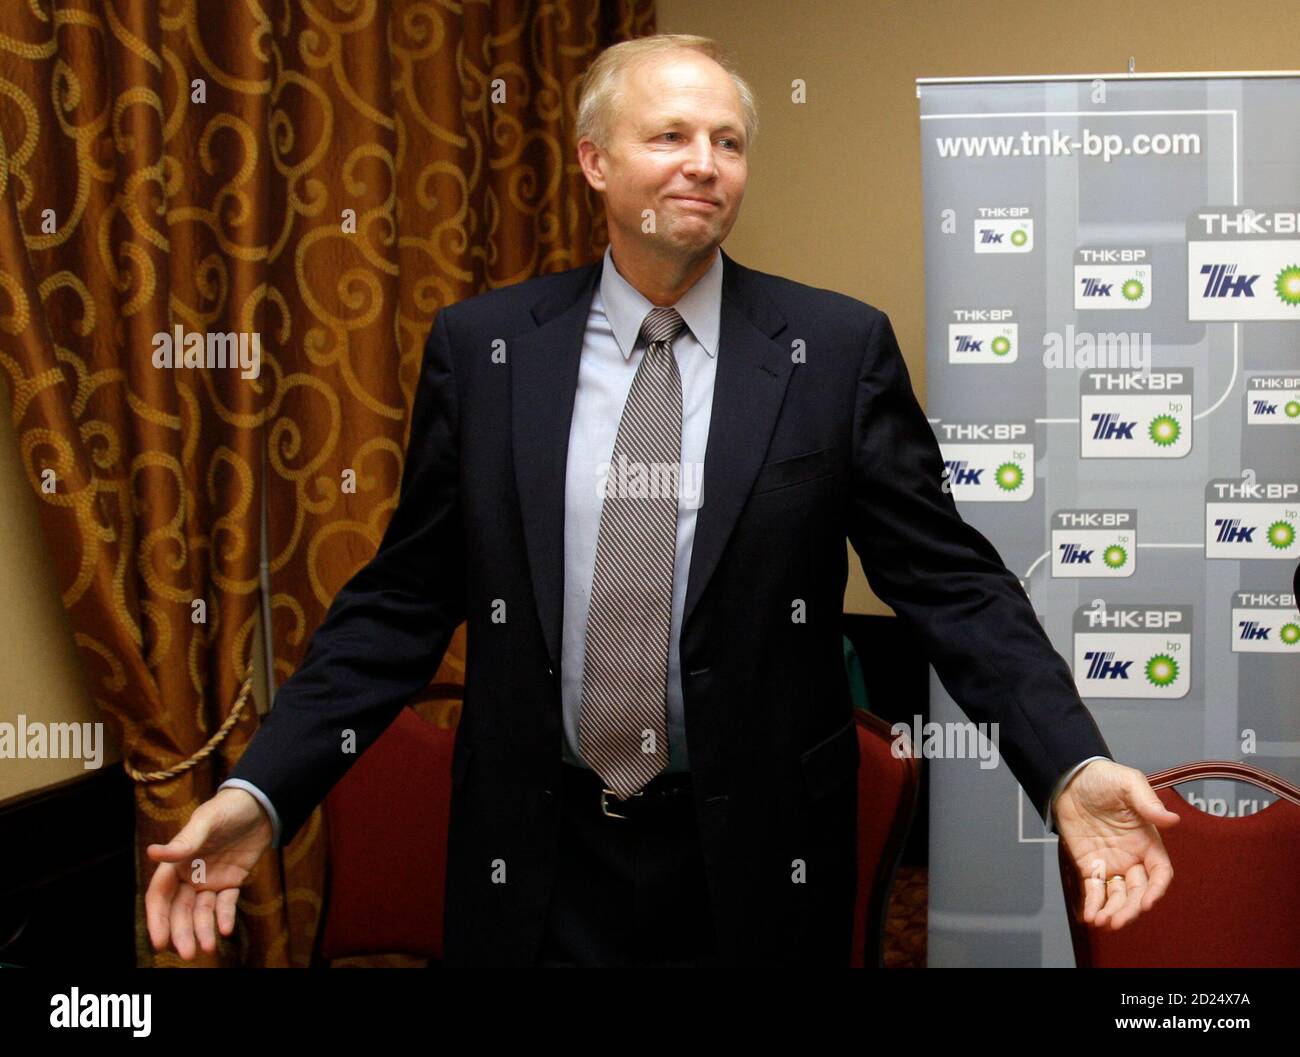 TNK-BP Chief Executive Robert Dudley gestures after a news conference in Moscow July 17, 2008. Dudley said a shareholder dispute would 'tear the company apart' after a group of employees filed a lawsuit against him in Thursday, accusing him of mismanaging Russia's No. 3 oil firm. REUTERS/Denis Sinyakov (RUSSIA) Stock Photo